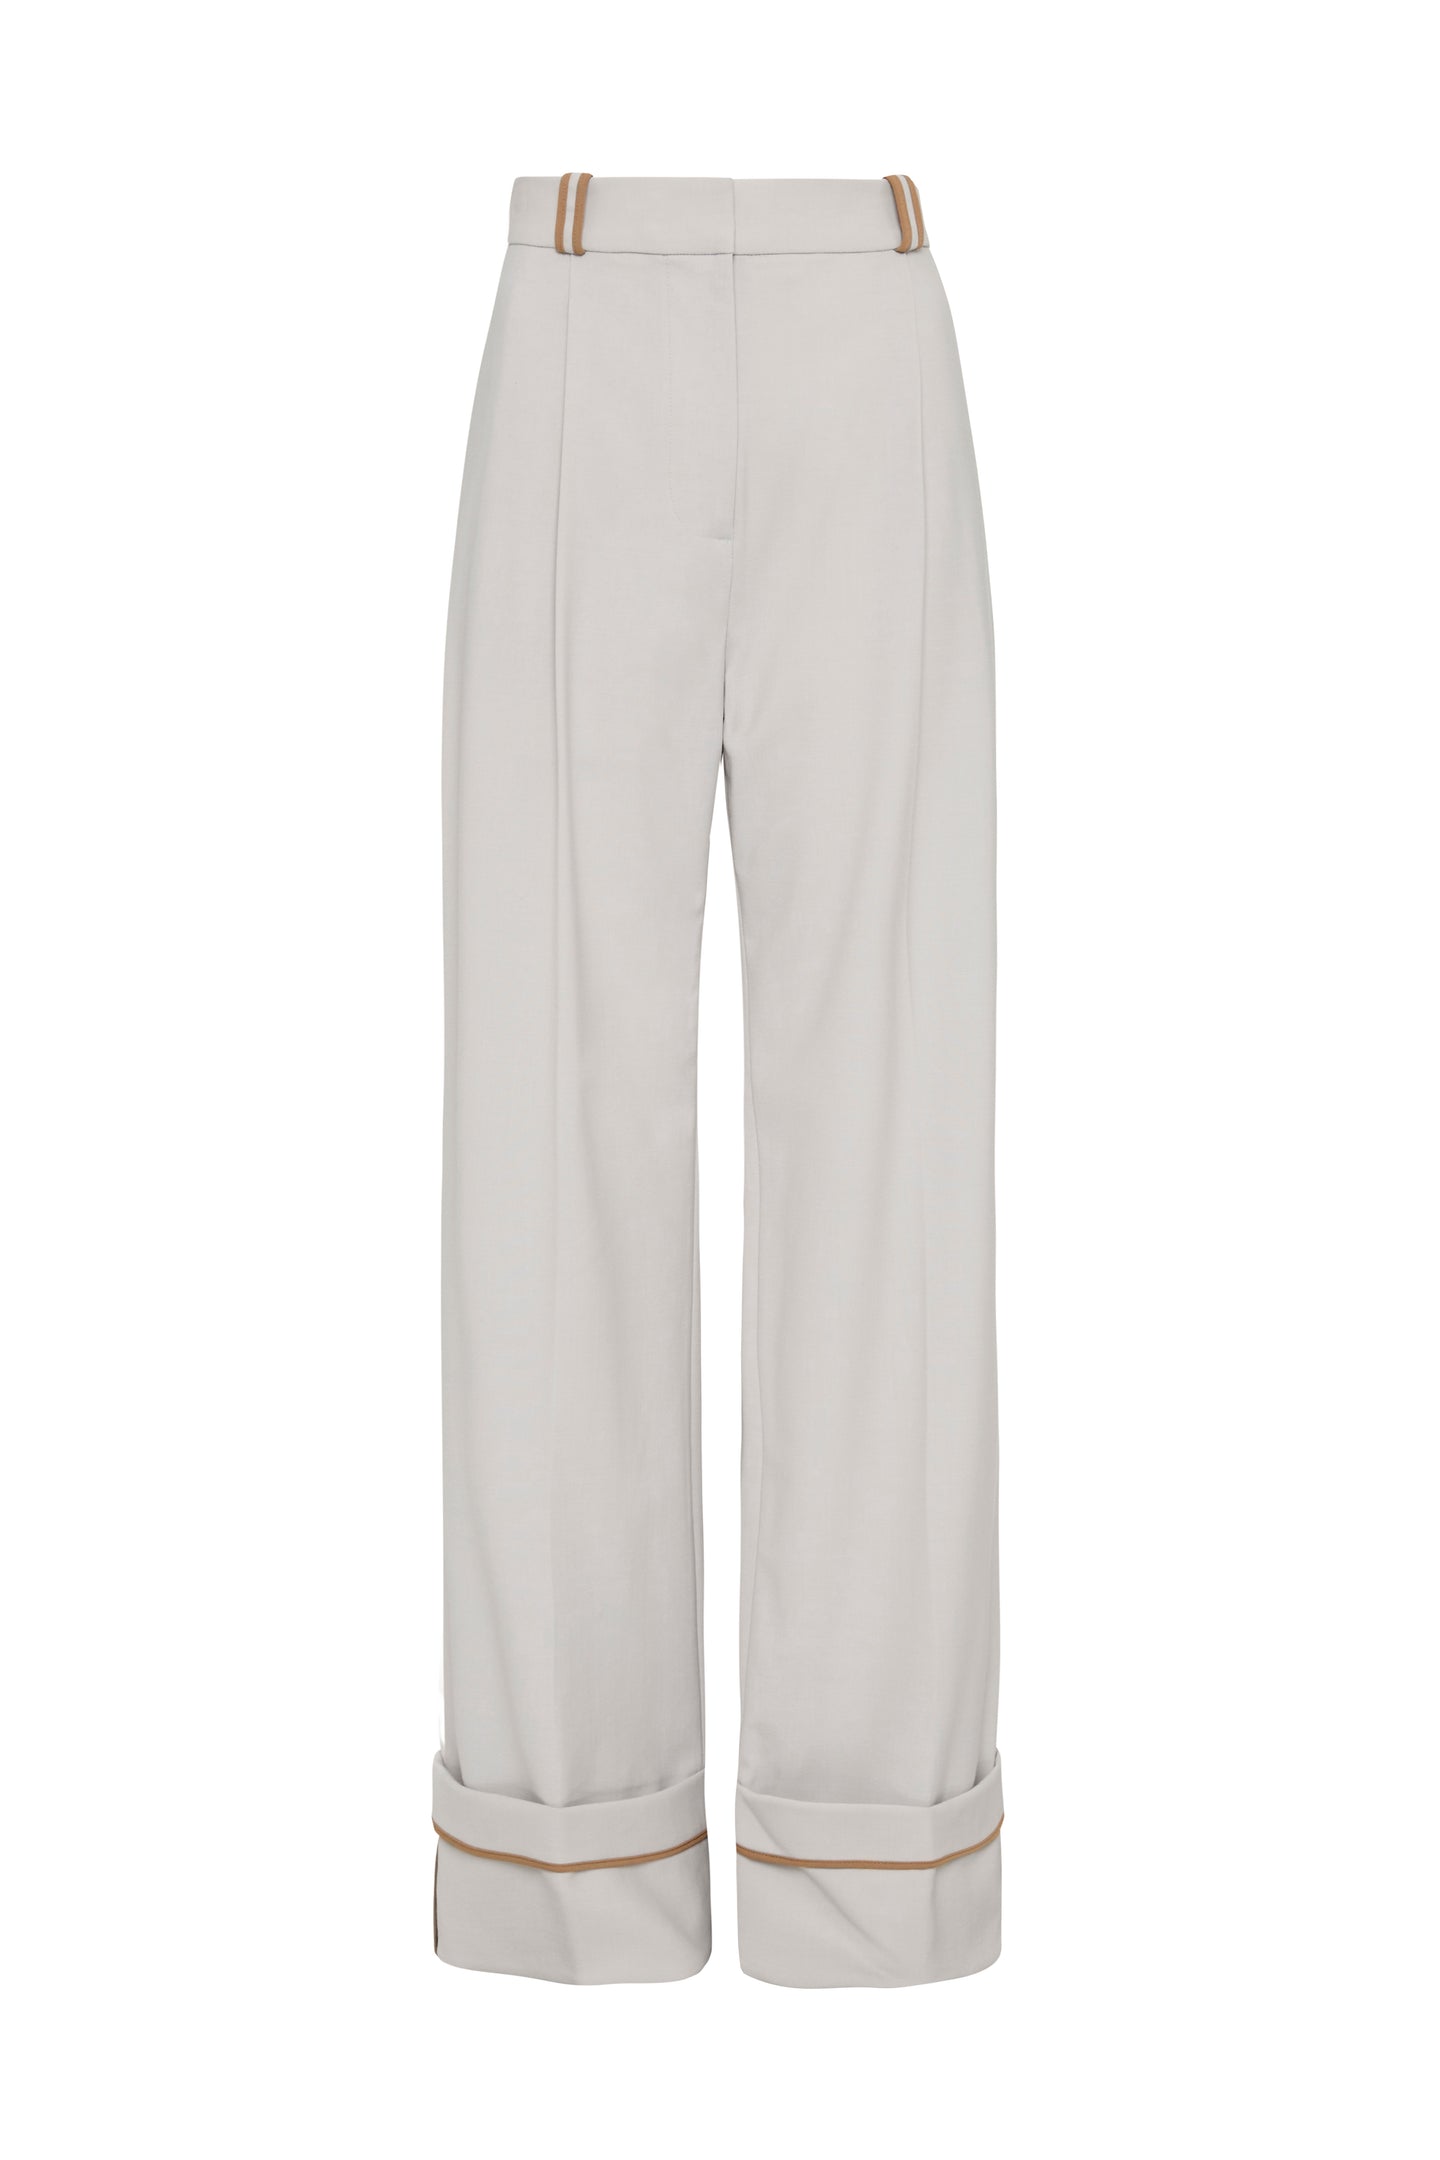 SIR the label Leni Cuff Trouser ICE BLUE